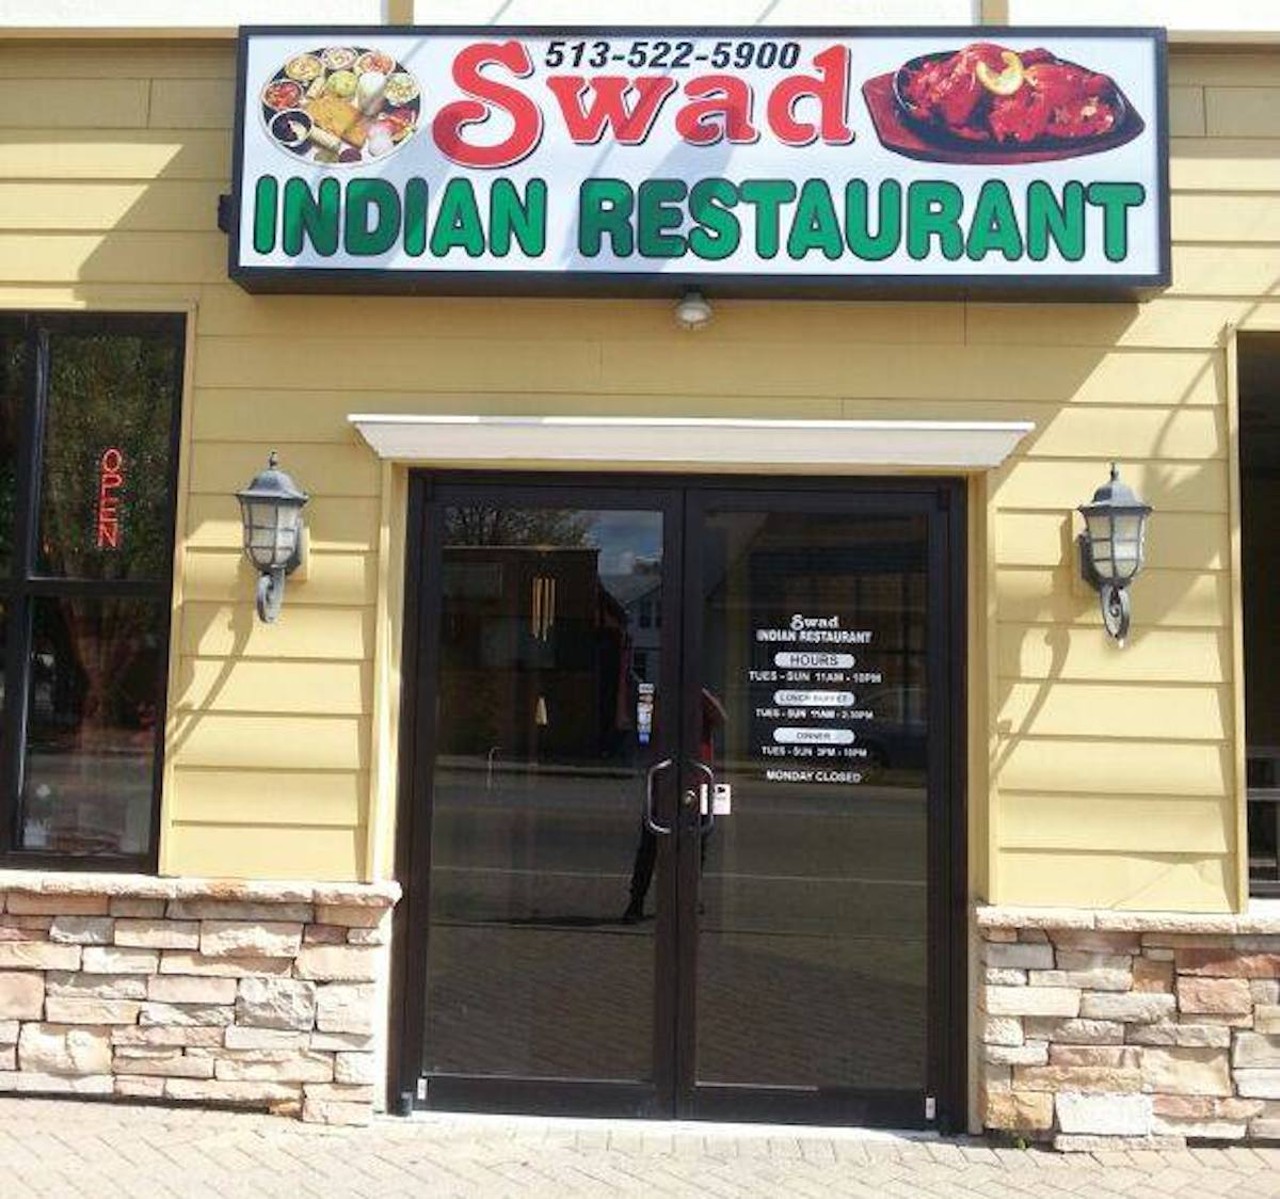 Swad Indian Restaurant
1810 Galbraith Road, North College Hill
“I live just down the street from them in North College Hill and get delivery/pick-up multiple times a month. At no point have they disappointed. However, today's order was something else entirely! I don't know what they do to their vindaloo sauce but ooooh is it the best I've had the privilege to try! I know they add tomatoes, which is unconventional but boy is it effective.
I'm not a huge potato fan but I will make an exception just to get the sauce. Hell, if I could I'd just order the sauce and eat it like tomato soup. Their spice levels are always accurate (I always order the highest level and have never been too overwhelmed), their facilities are clean, and the service is friendly.” -Tracey S.